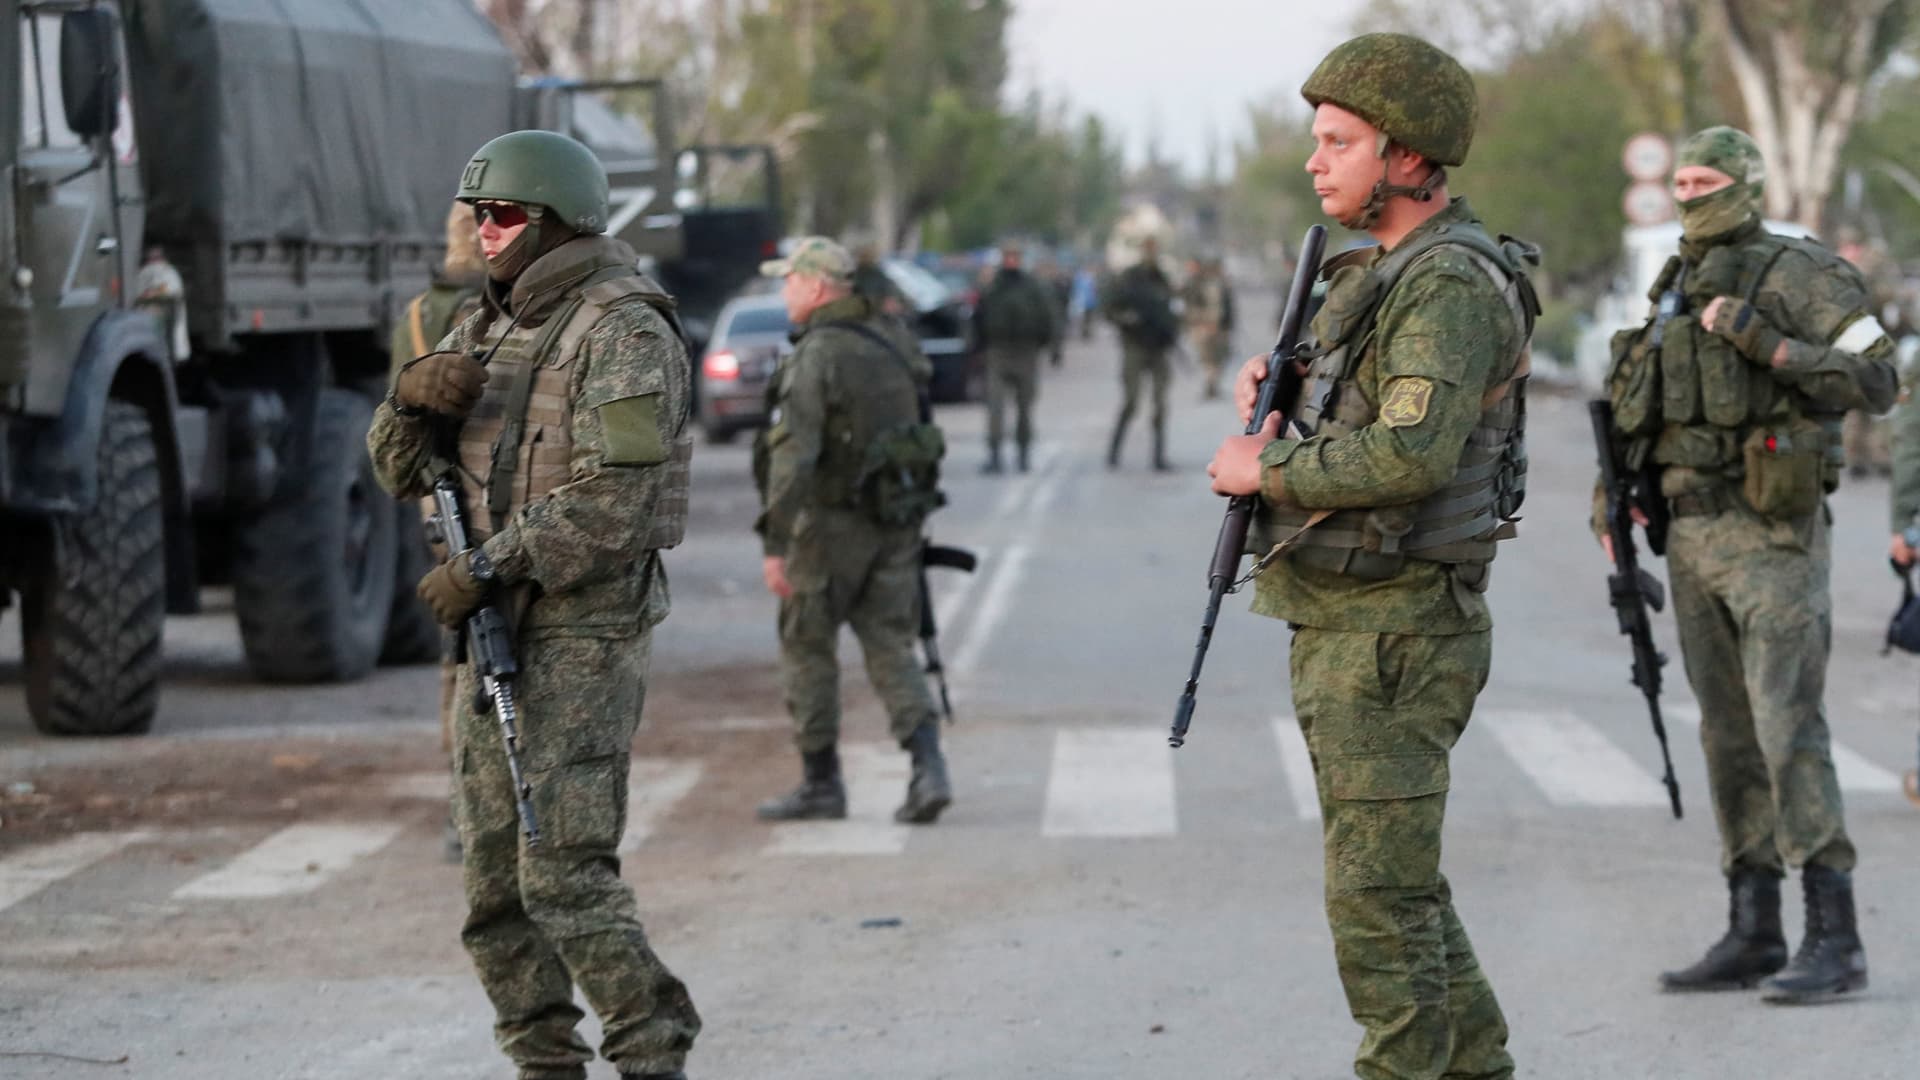 Service members of pro-Russian troops stand guard on a road before the expected evacuation of wounded Ukrainian soldiers from the besieged Azovstal steel mill in the course of Ukraine-Russia conflict in Mariupol, Ukraine May 16, 2022.